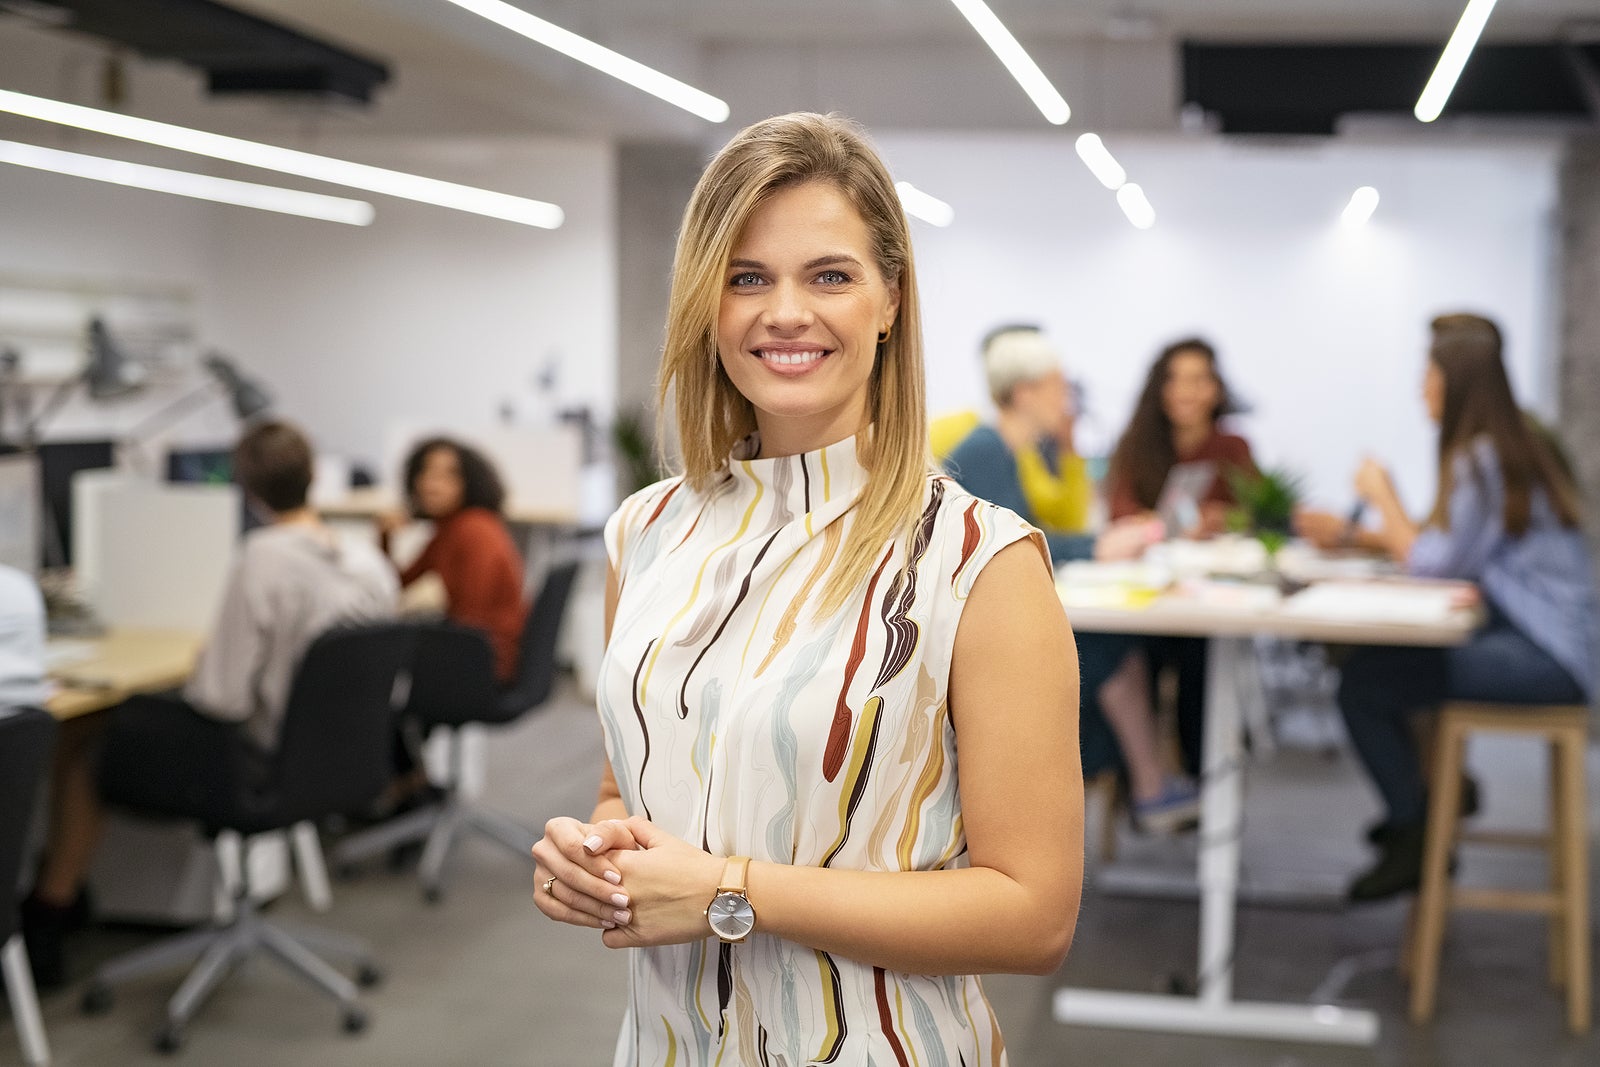 Portrait of beautiful business woman looking at camera while business team working in background. Executive woman standing in office. Happy and smiling creative businesswoman with co-workers.